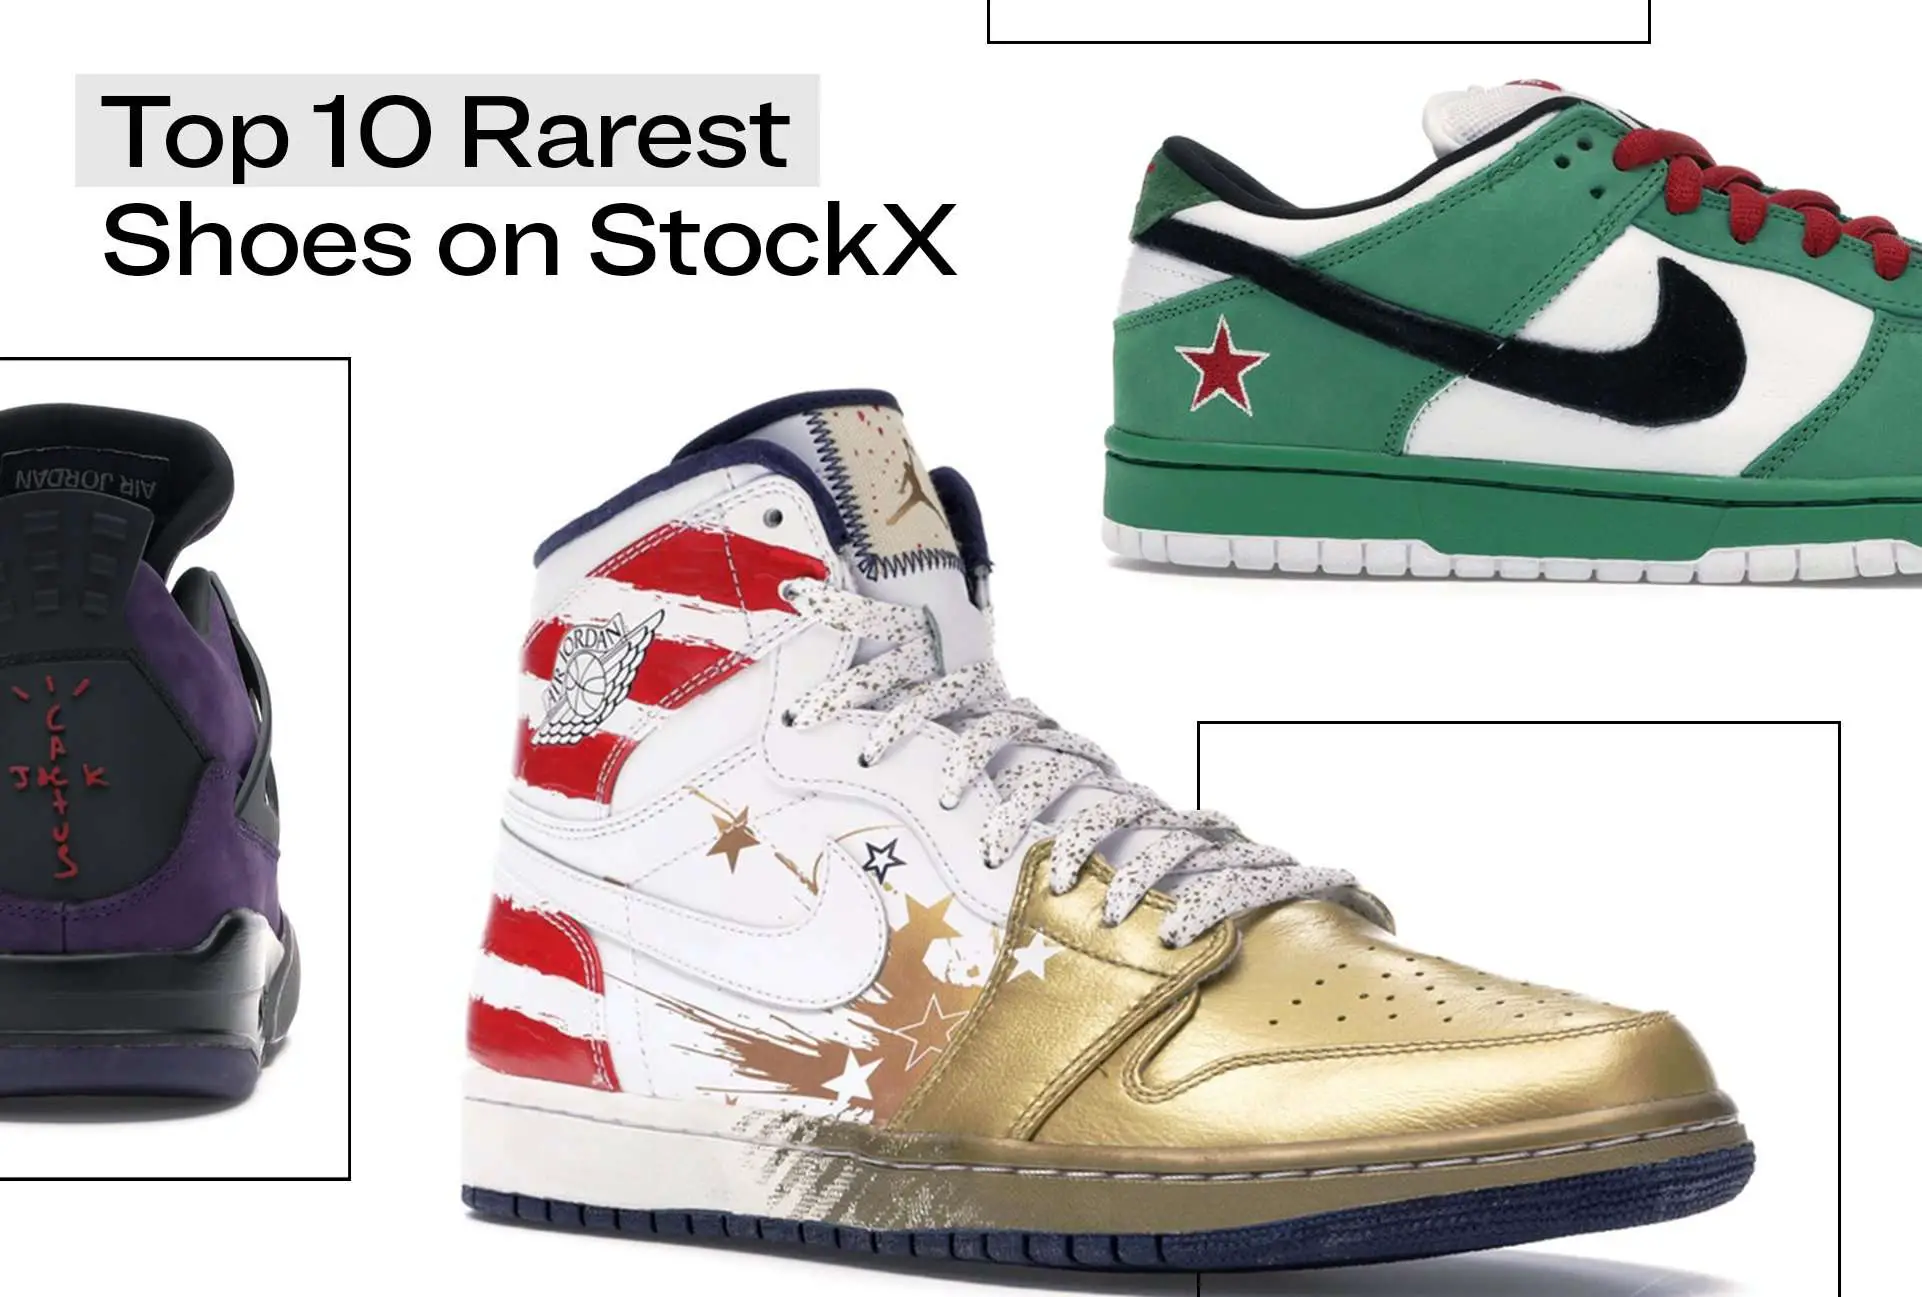 The Rarest Shoes on StockX in 2020